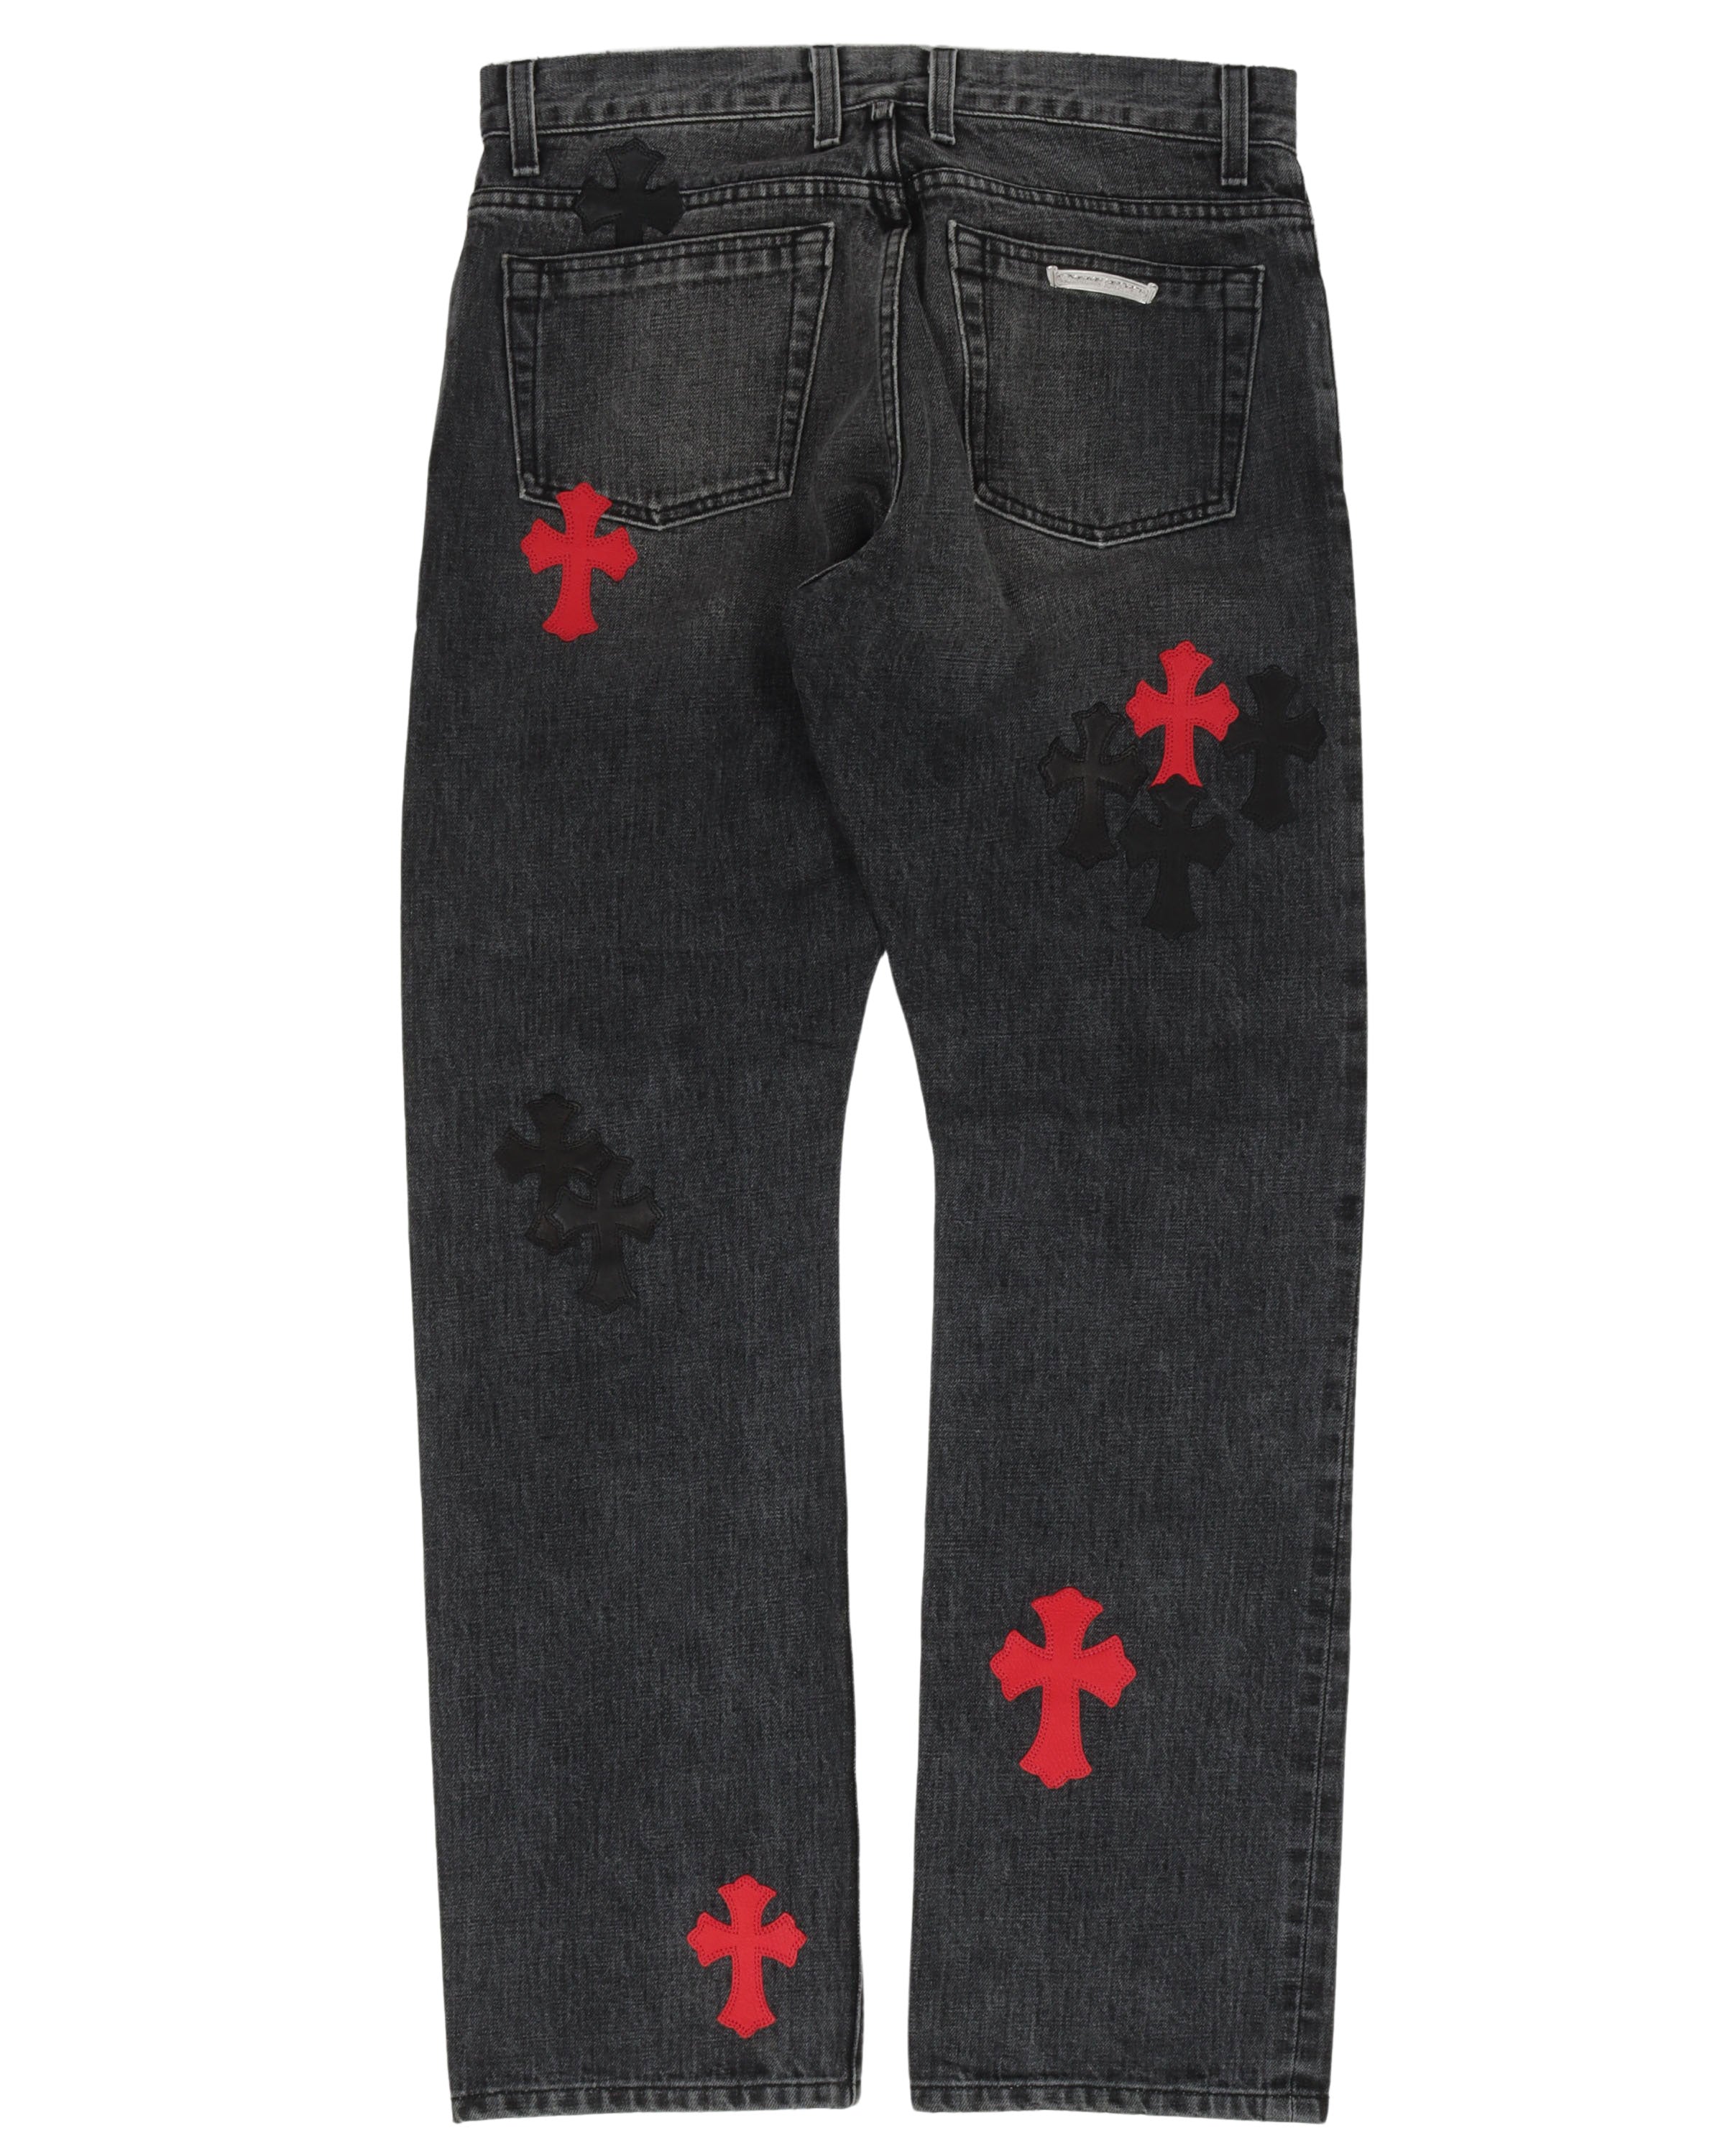 Chrome Hearts Multi Color Cross Patch Faded Jeans